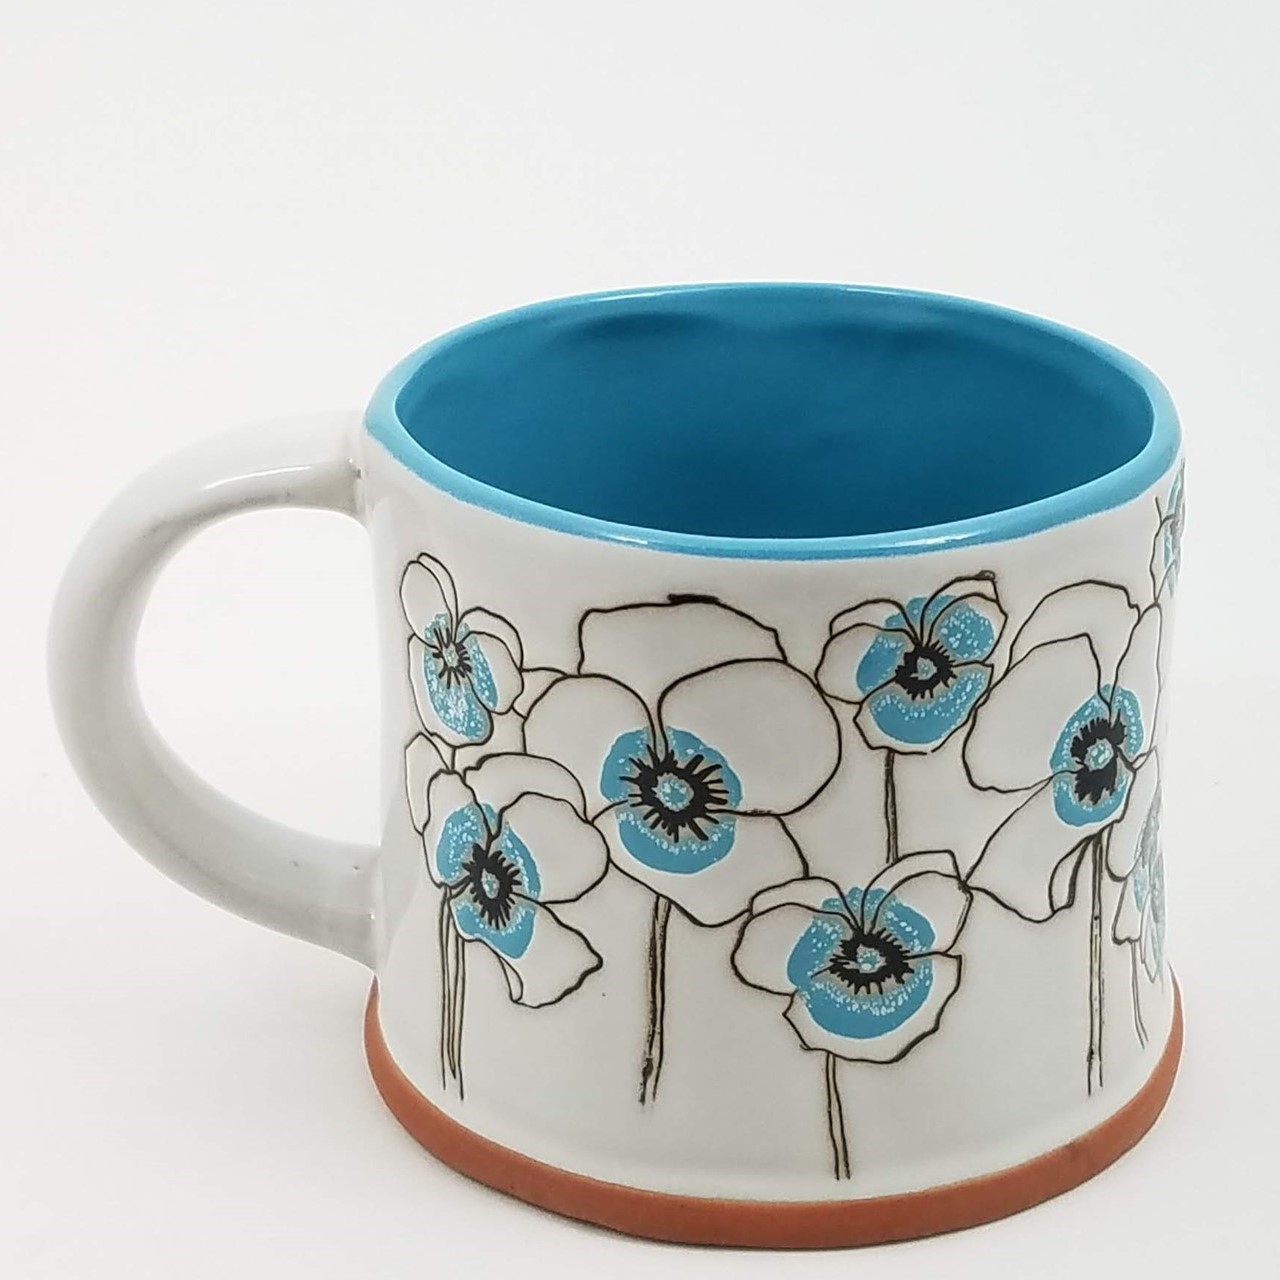 This Poppy Flower Coffee Mug Soup Cup Succulent Plant Holder 17oz (503ml) New is made with love by Premier Homegoods! Shop more unique gift ideas today with Spots Initiatives, the best way to support creators.